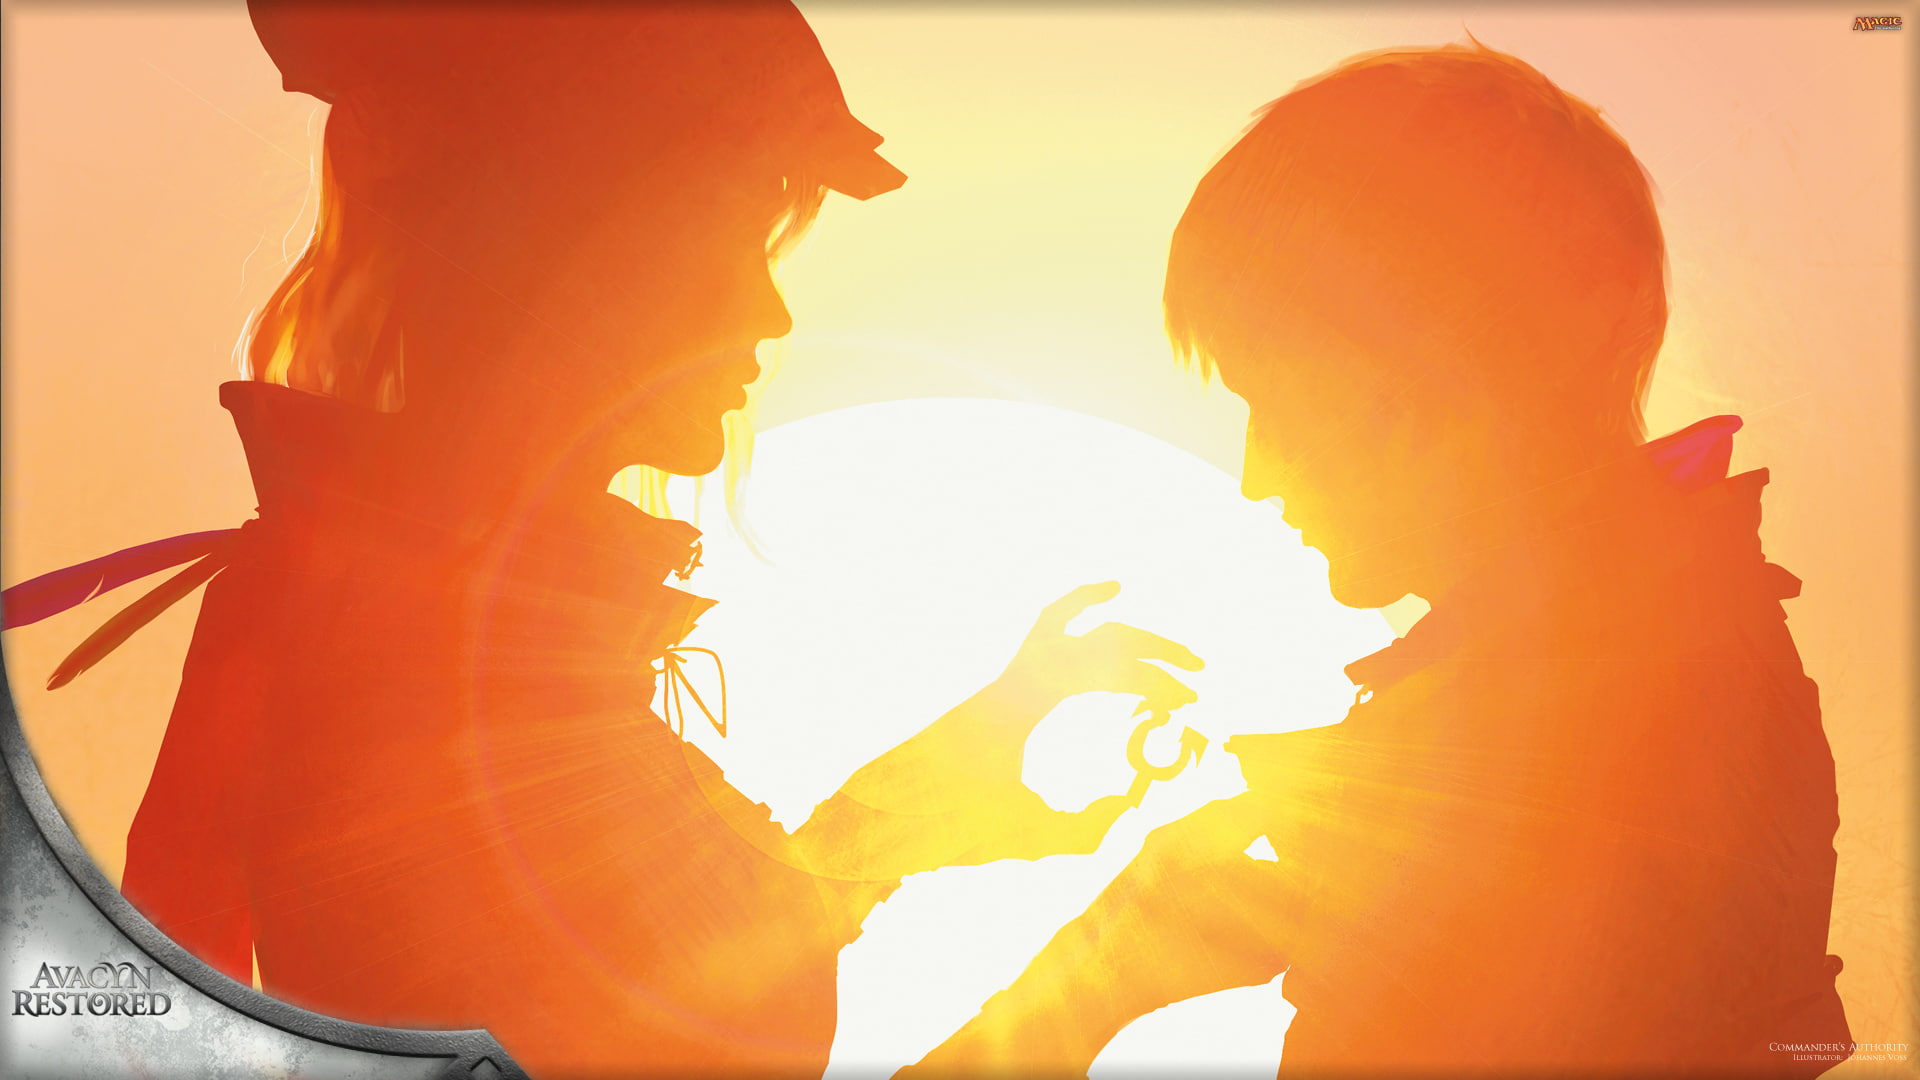 Magic: The Gathering Sunlight HD, two people silhouette, fantasy